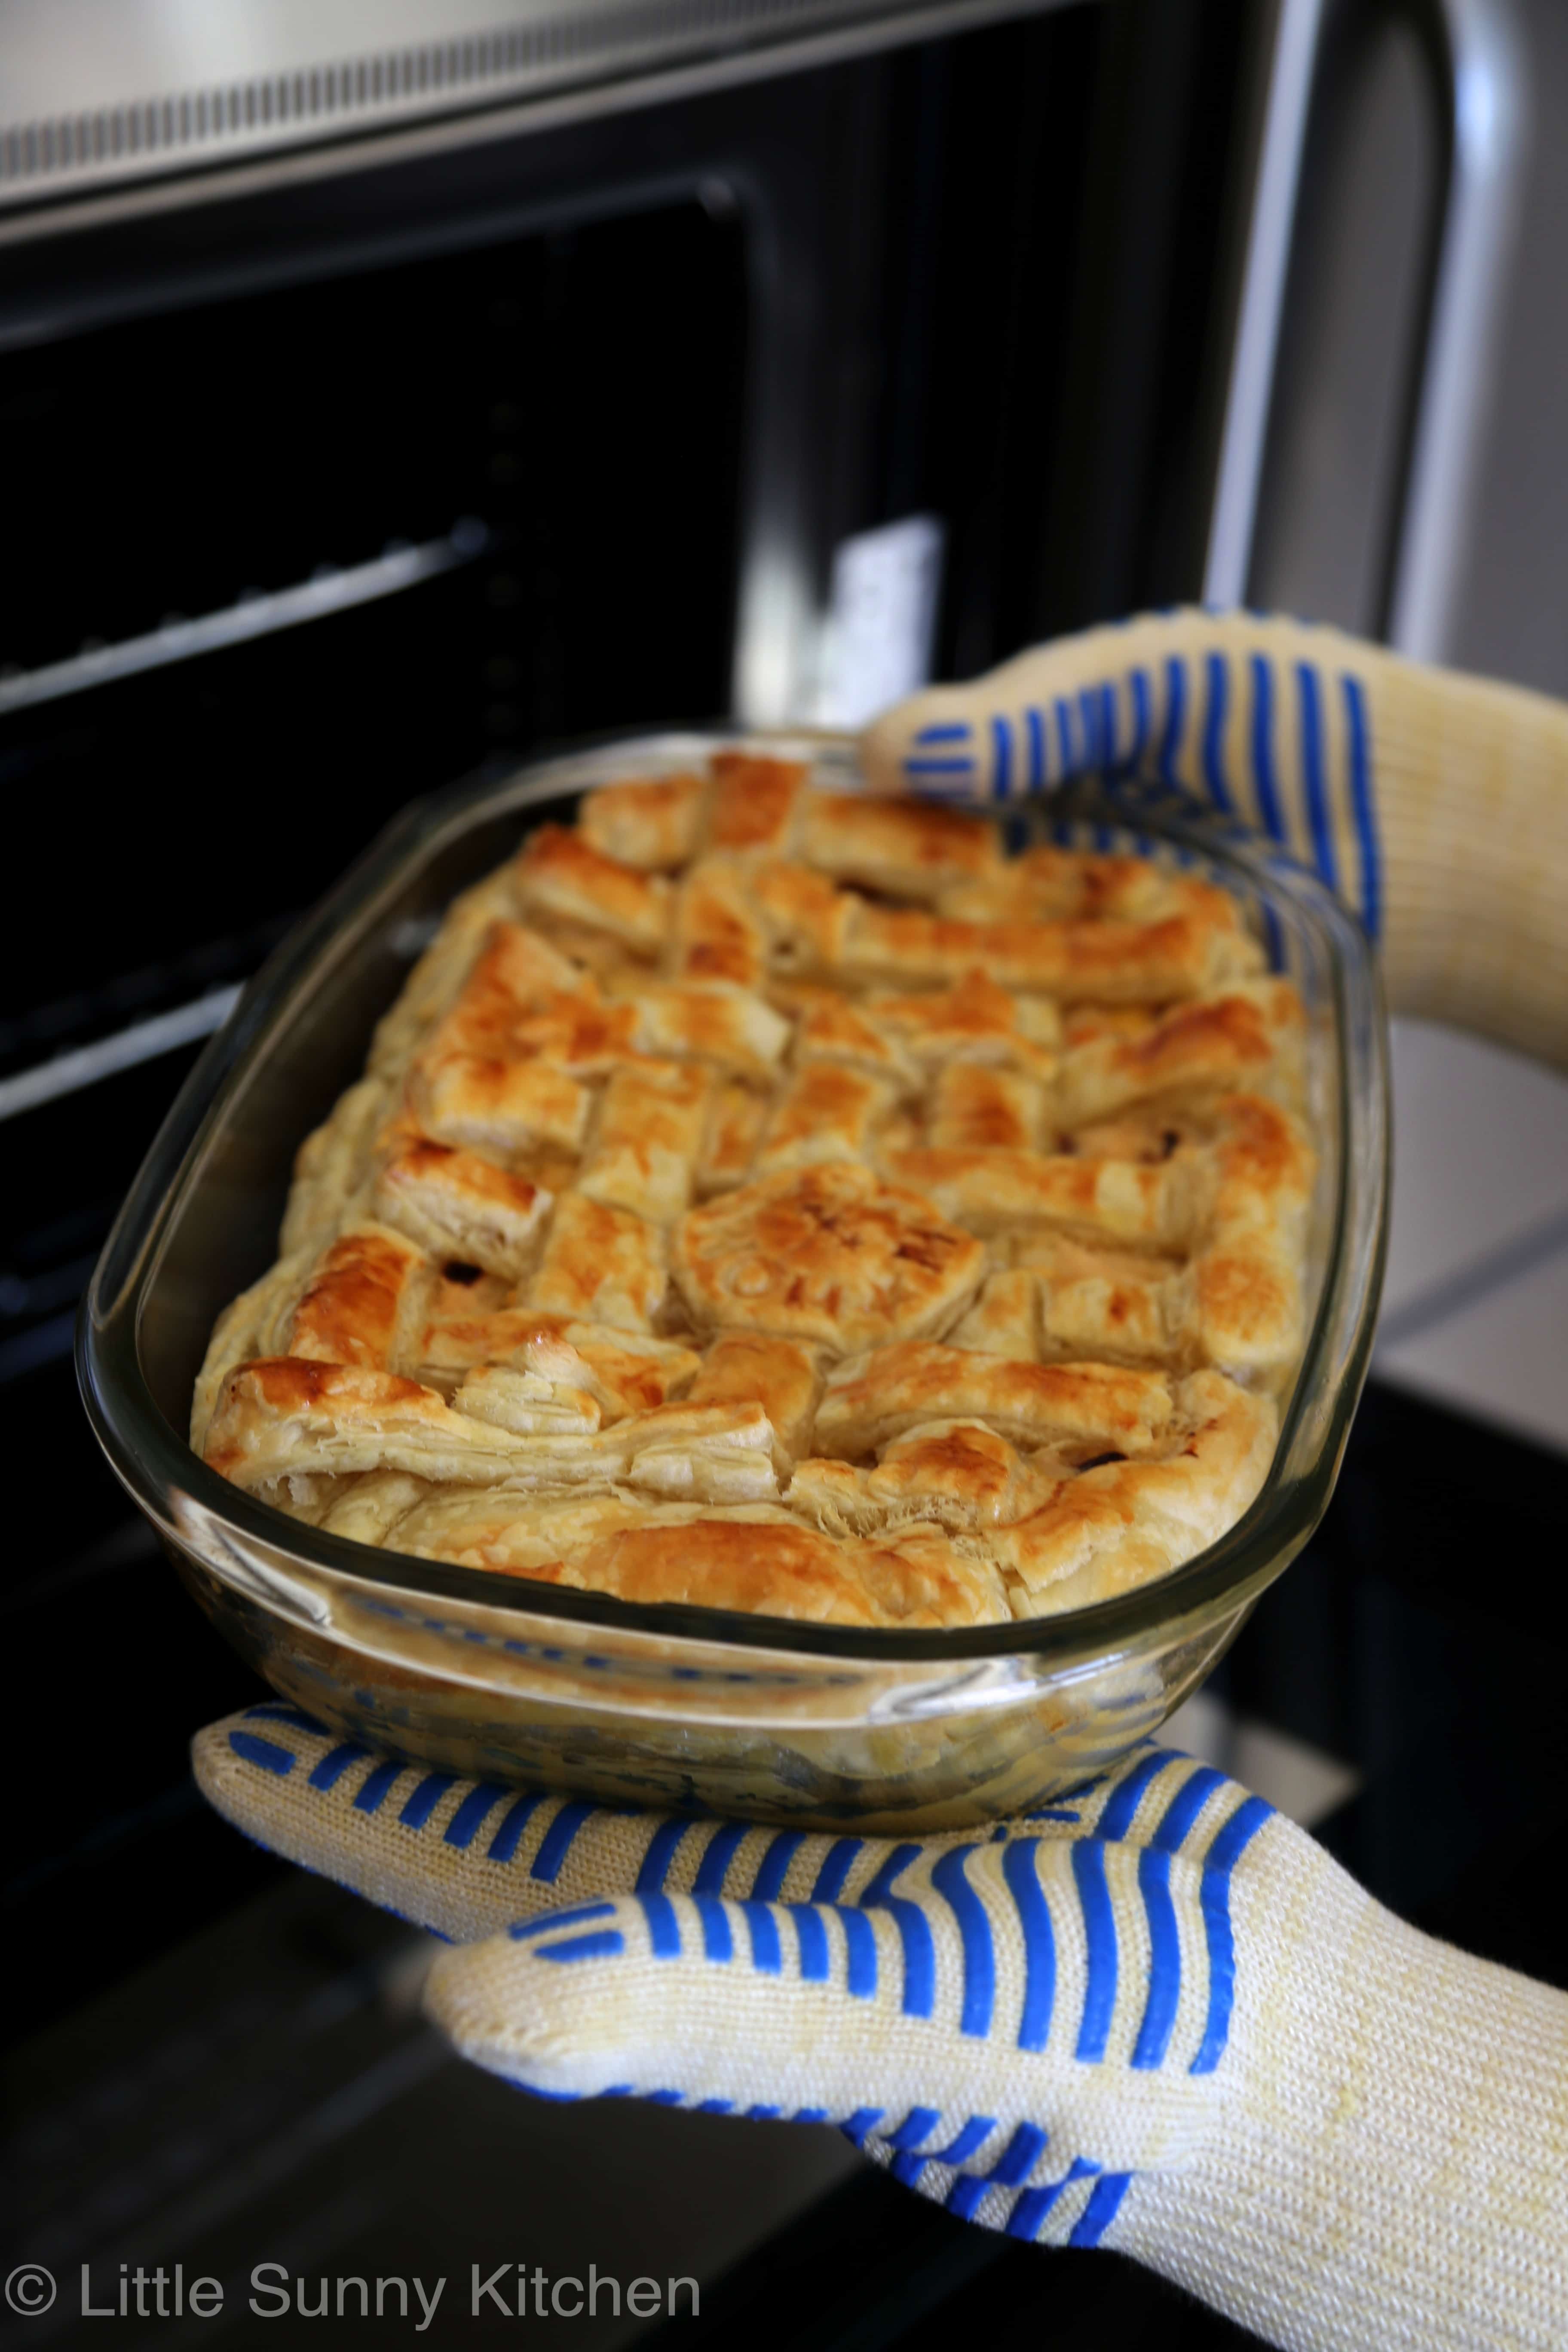 A delicious and super easy chicken pot pie made with puff pastry and vegetables. A perfect recipe for a weeknight meal! Suitable for freezing.